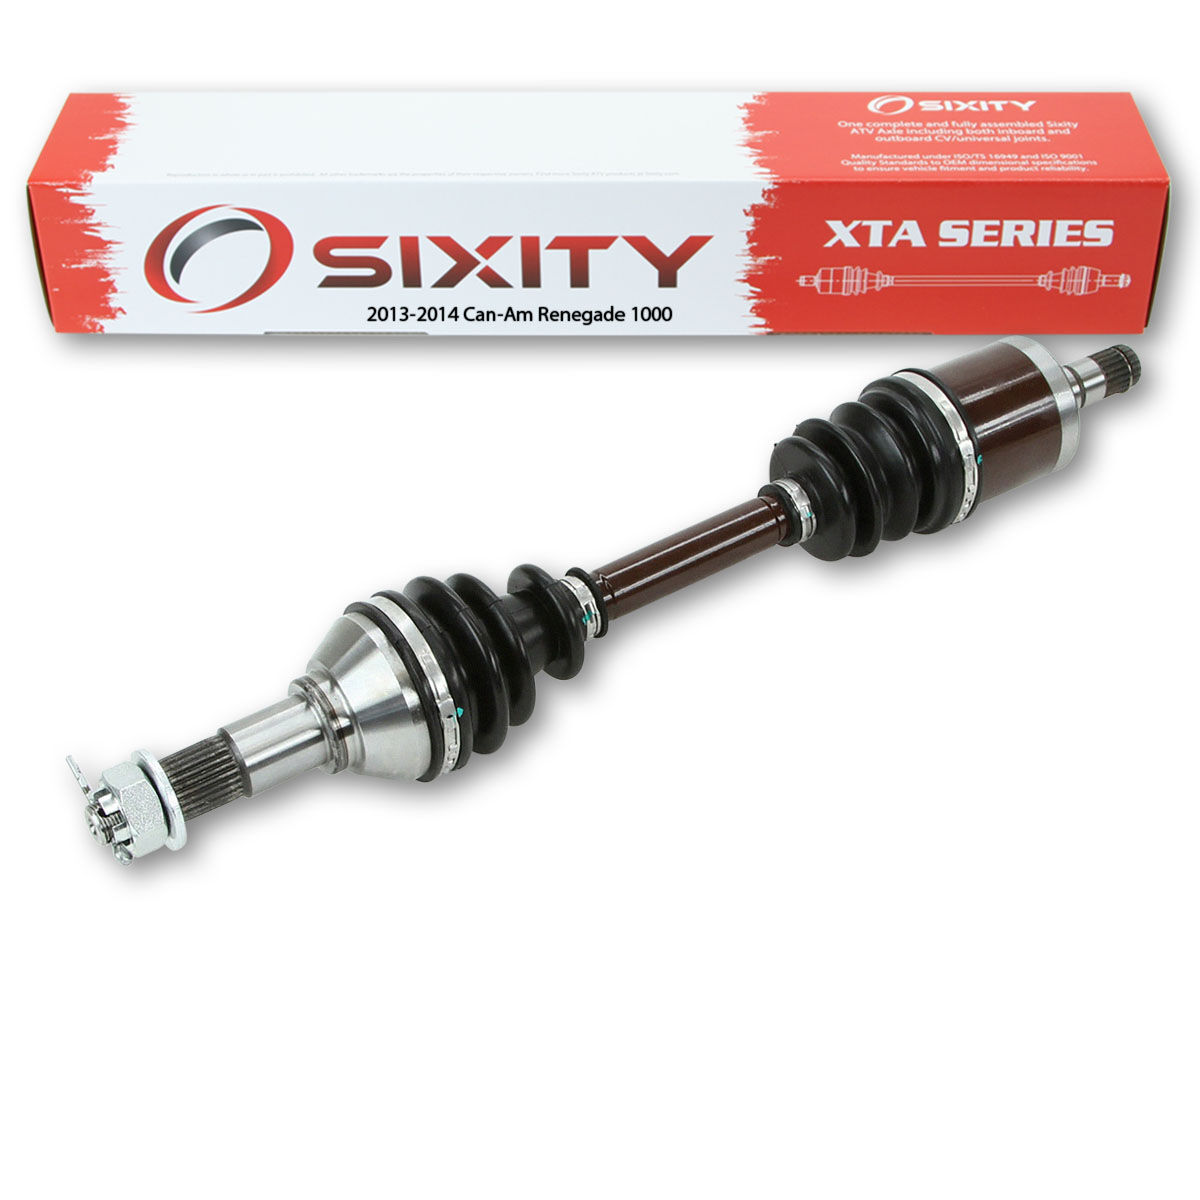 Sixity 2014 Can Am Renegade 1000 4X4 Front Left XTA ATV Axle